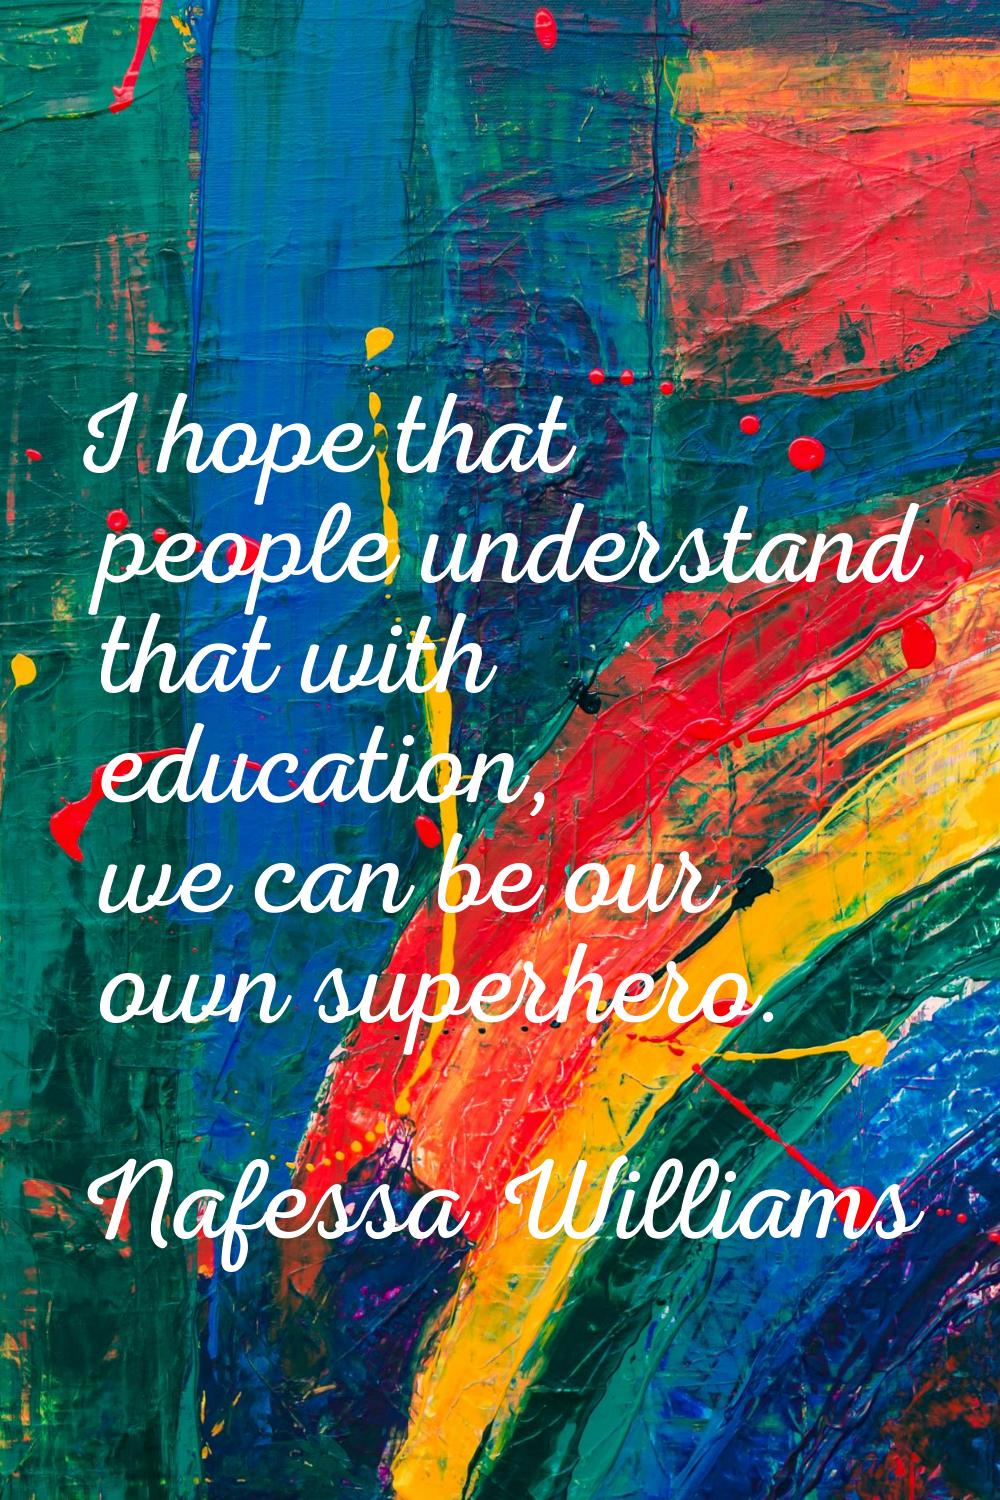 I hope that people understand that with education, we can be our own superhero.